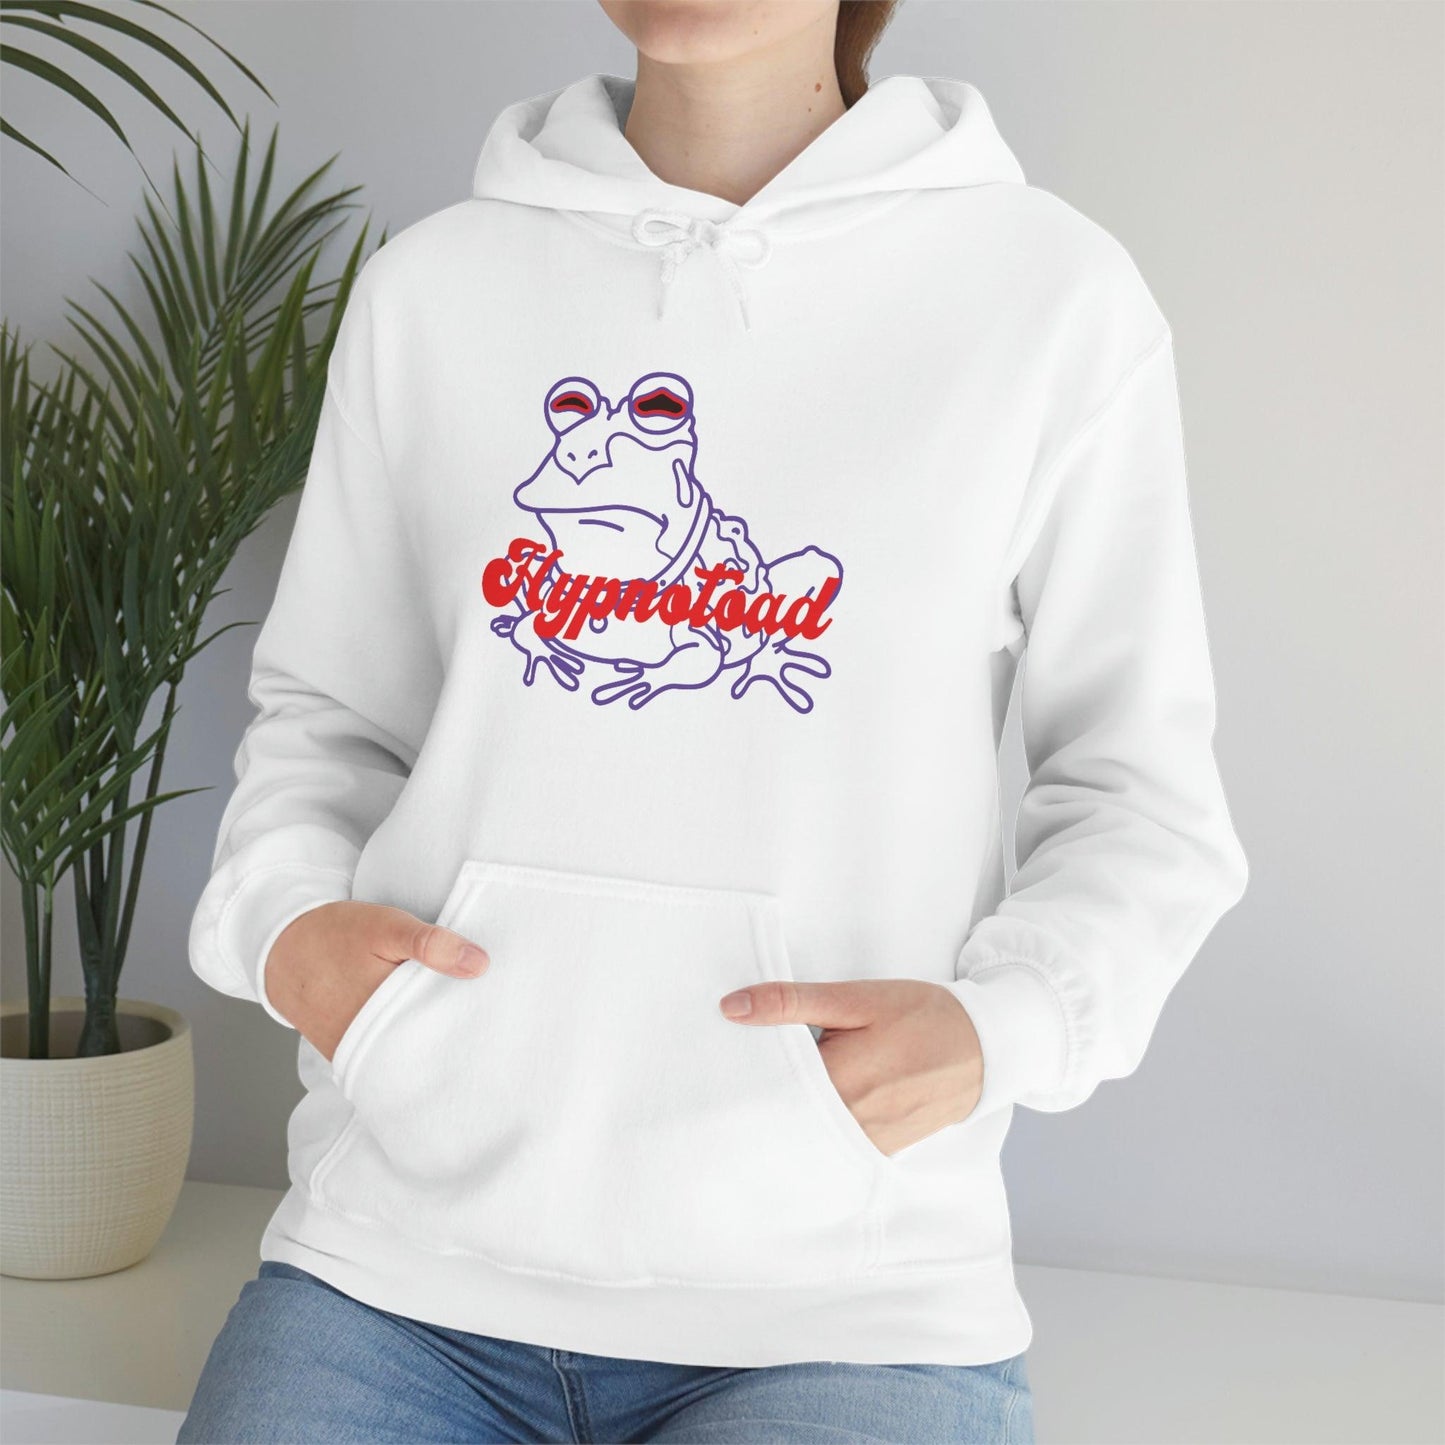 Outlined Hypnotoad Unisex Hoodie - Hypnotoad Store